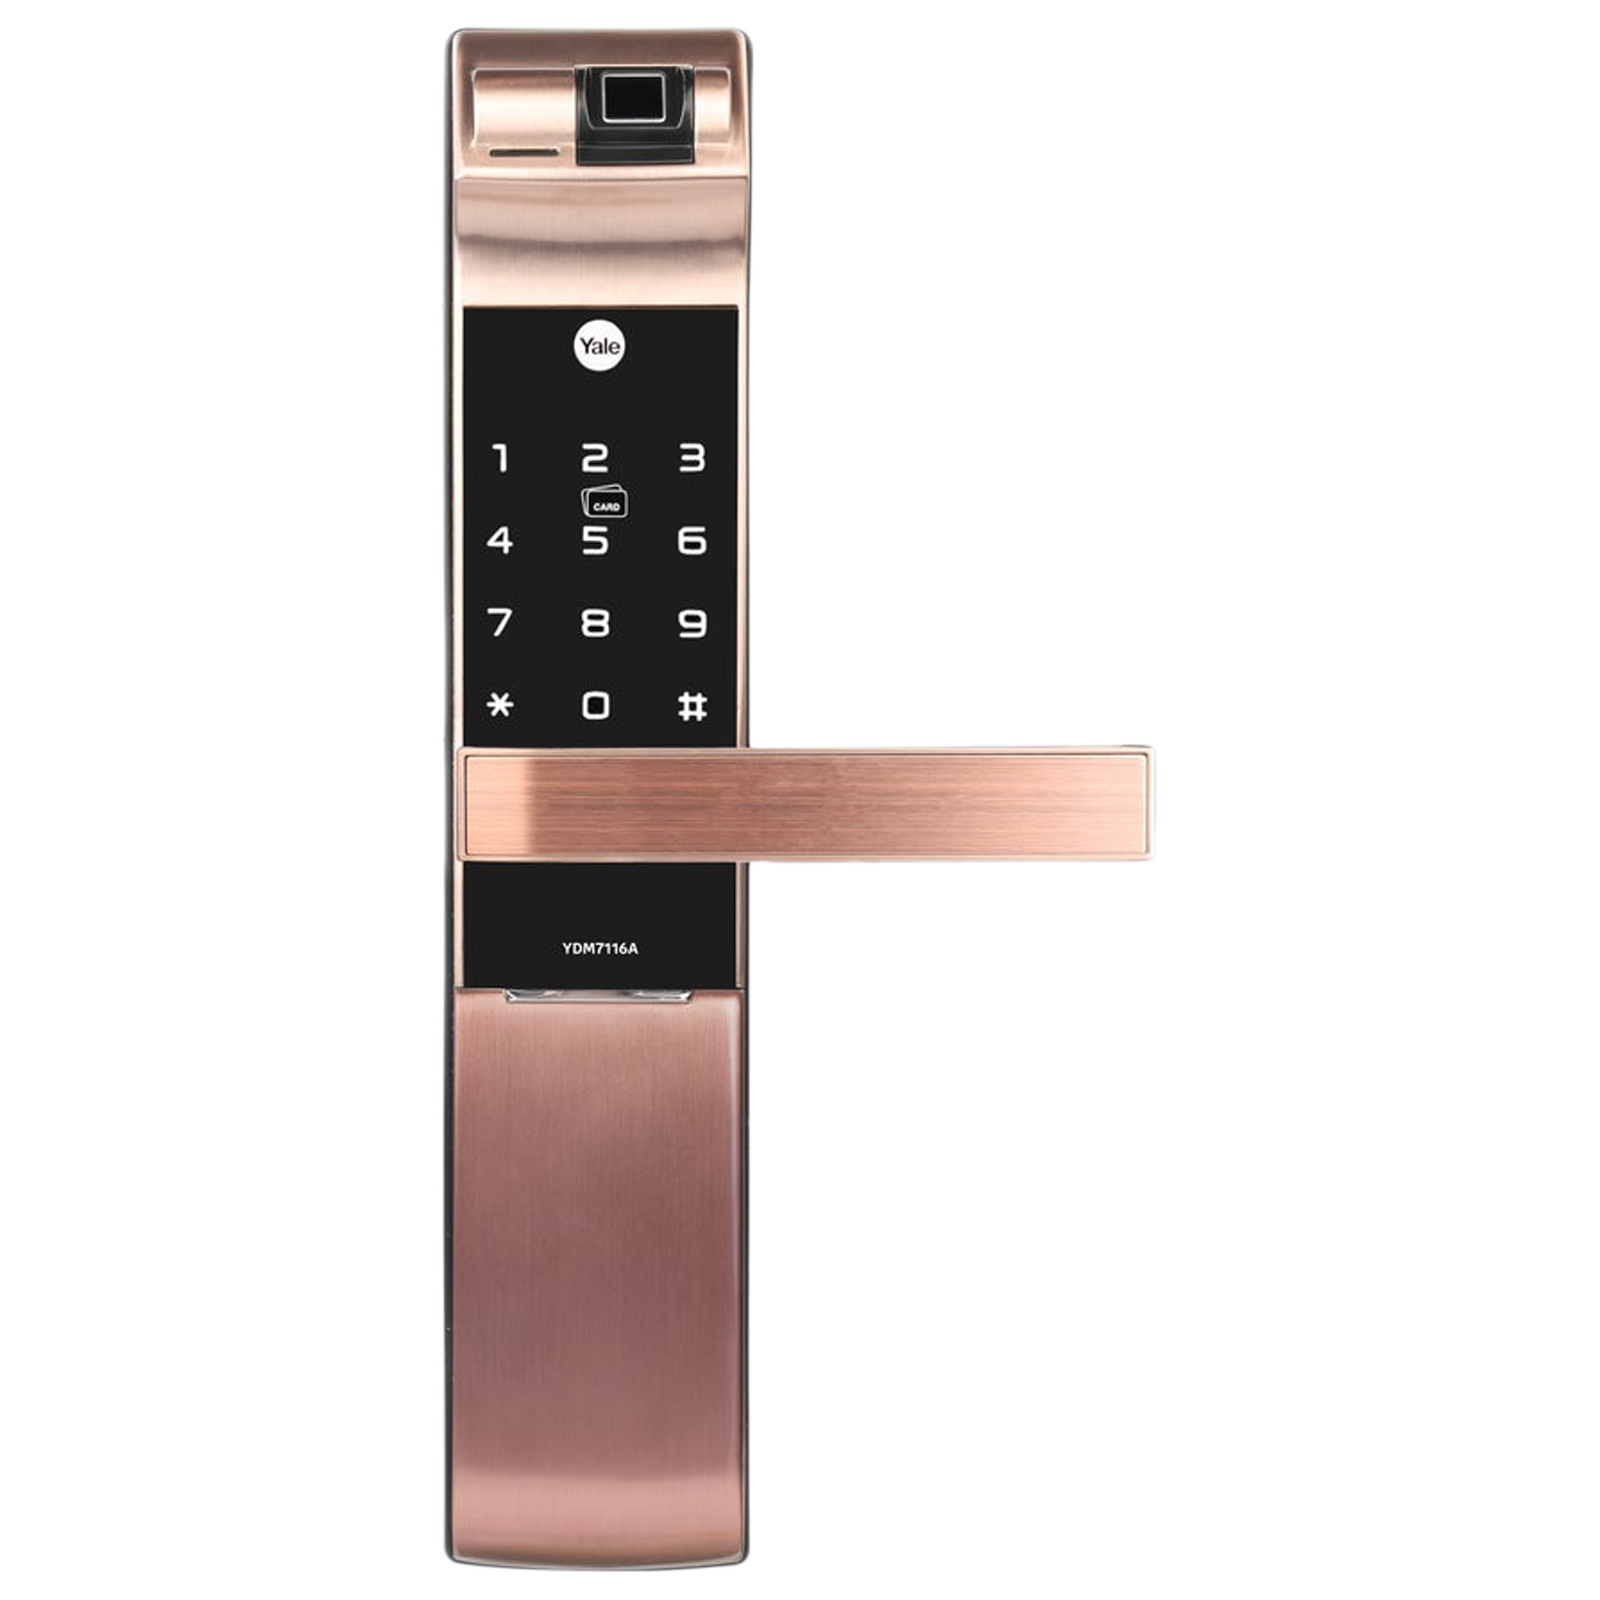 Yale RB Smart Lock For Private Space (Fingerprint Scanner, YDM 7116A, Red Bronze)